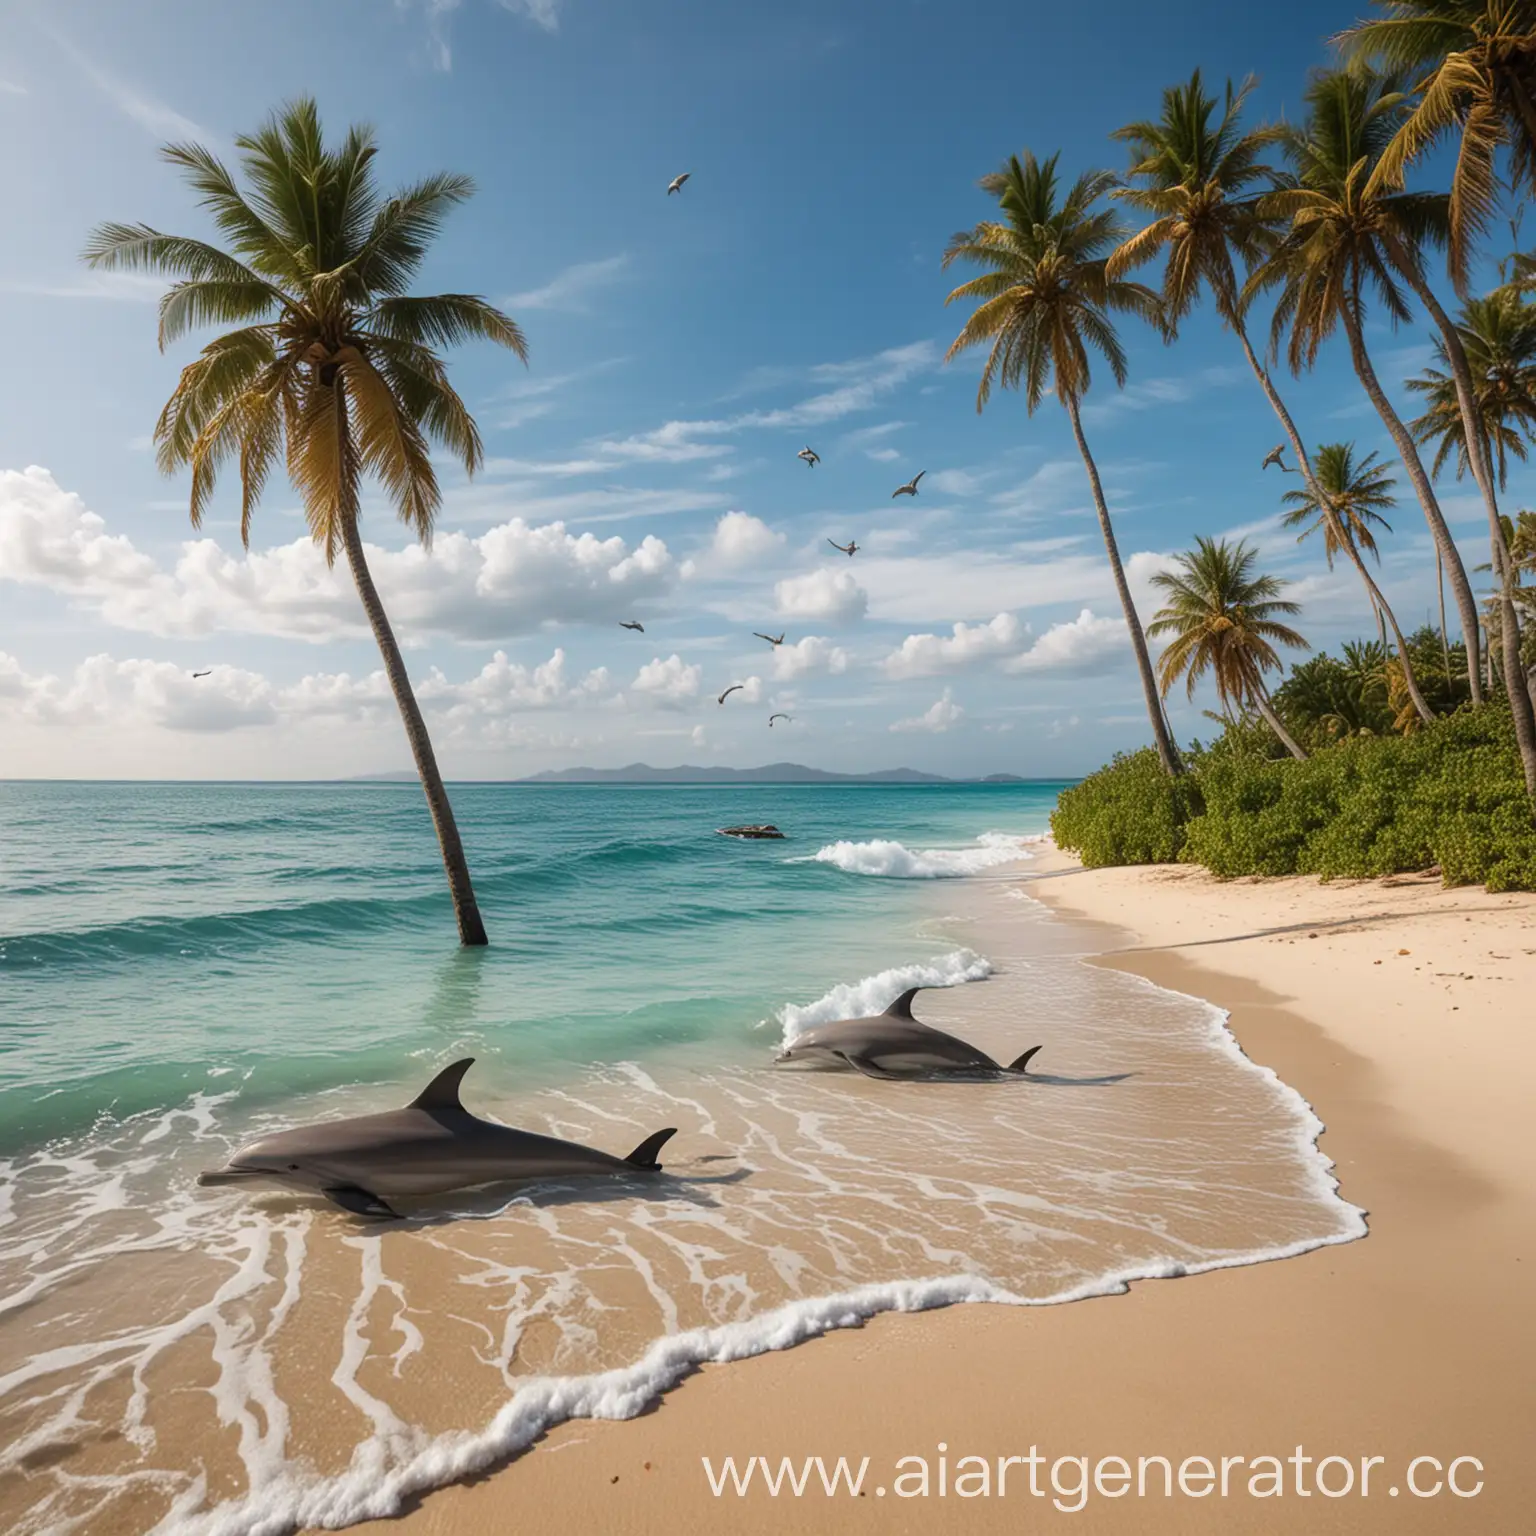 Tropical-Beach-Scene-with-Playful-Dolphins-and-Palm-Trees